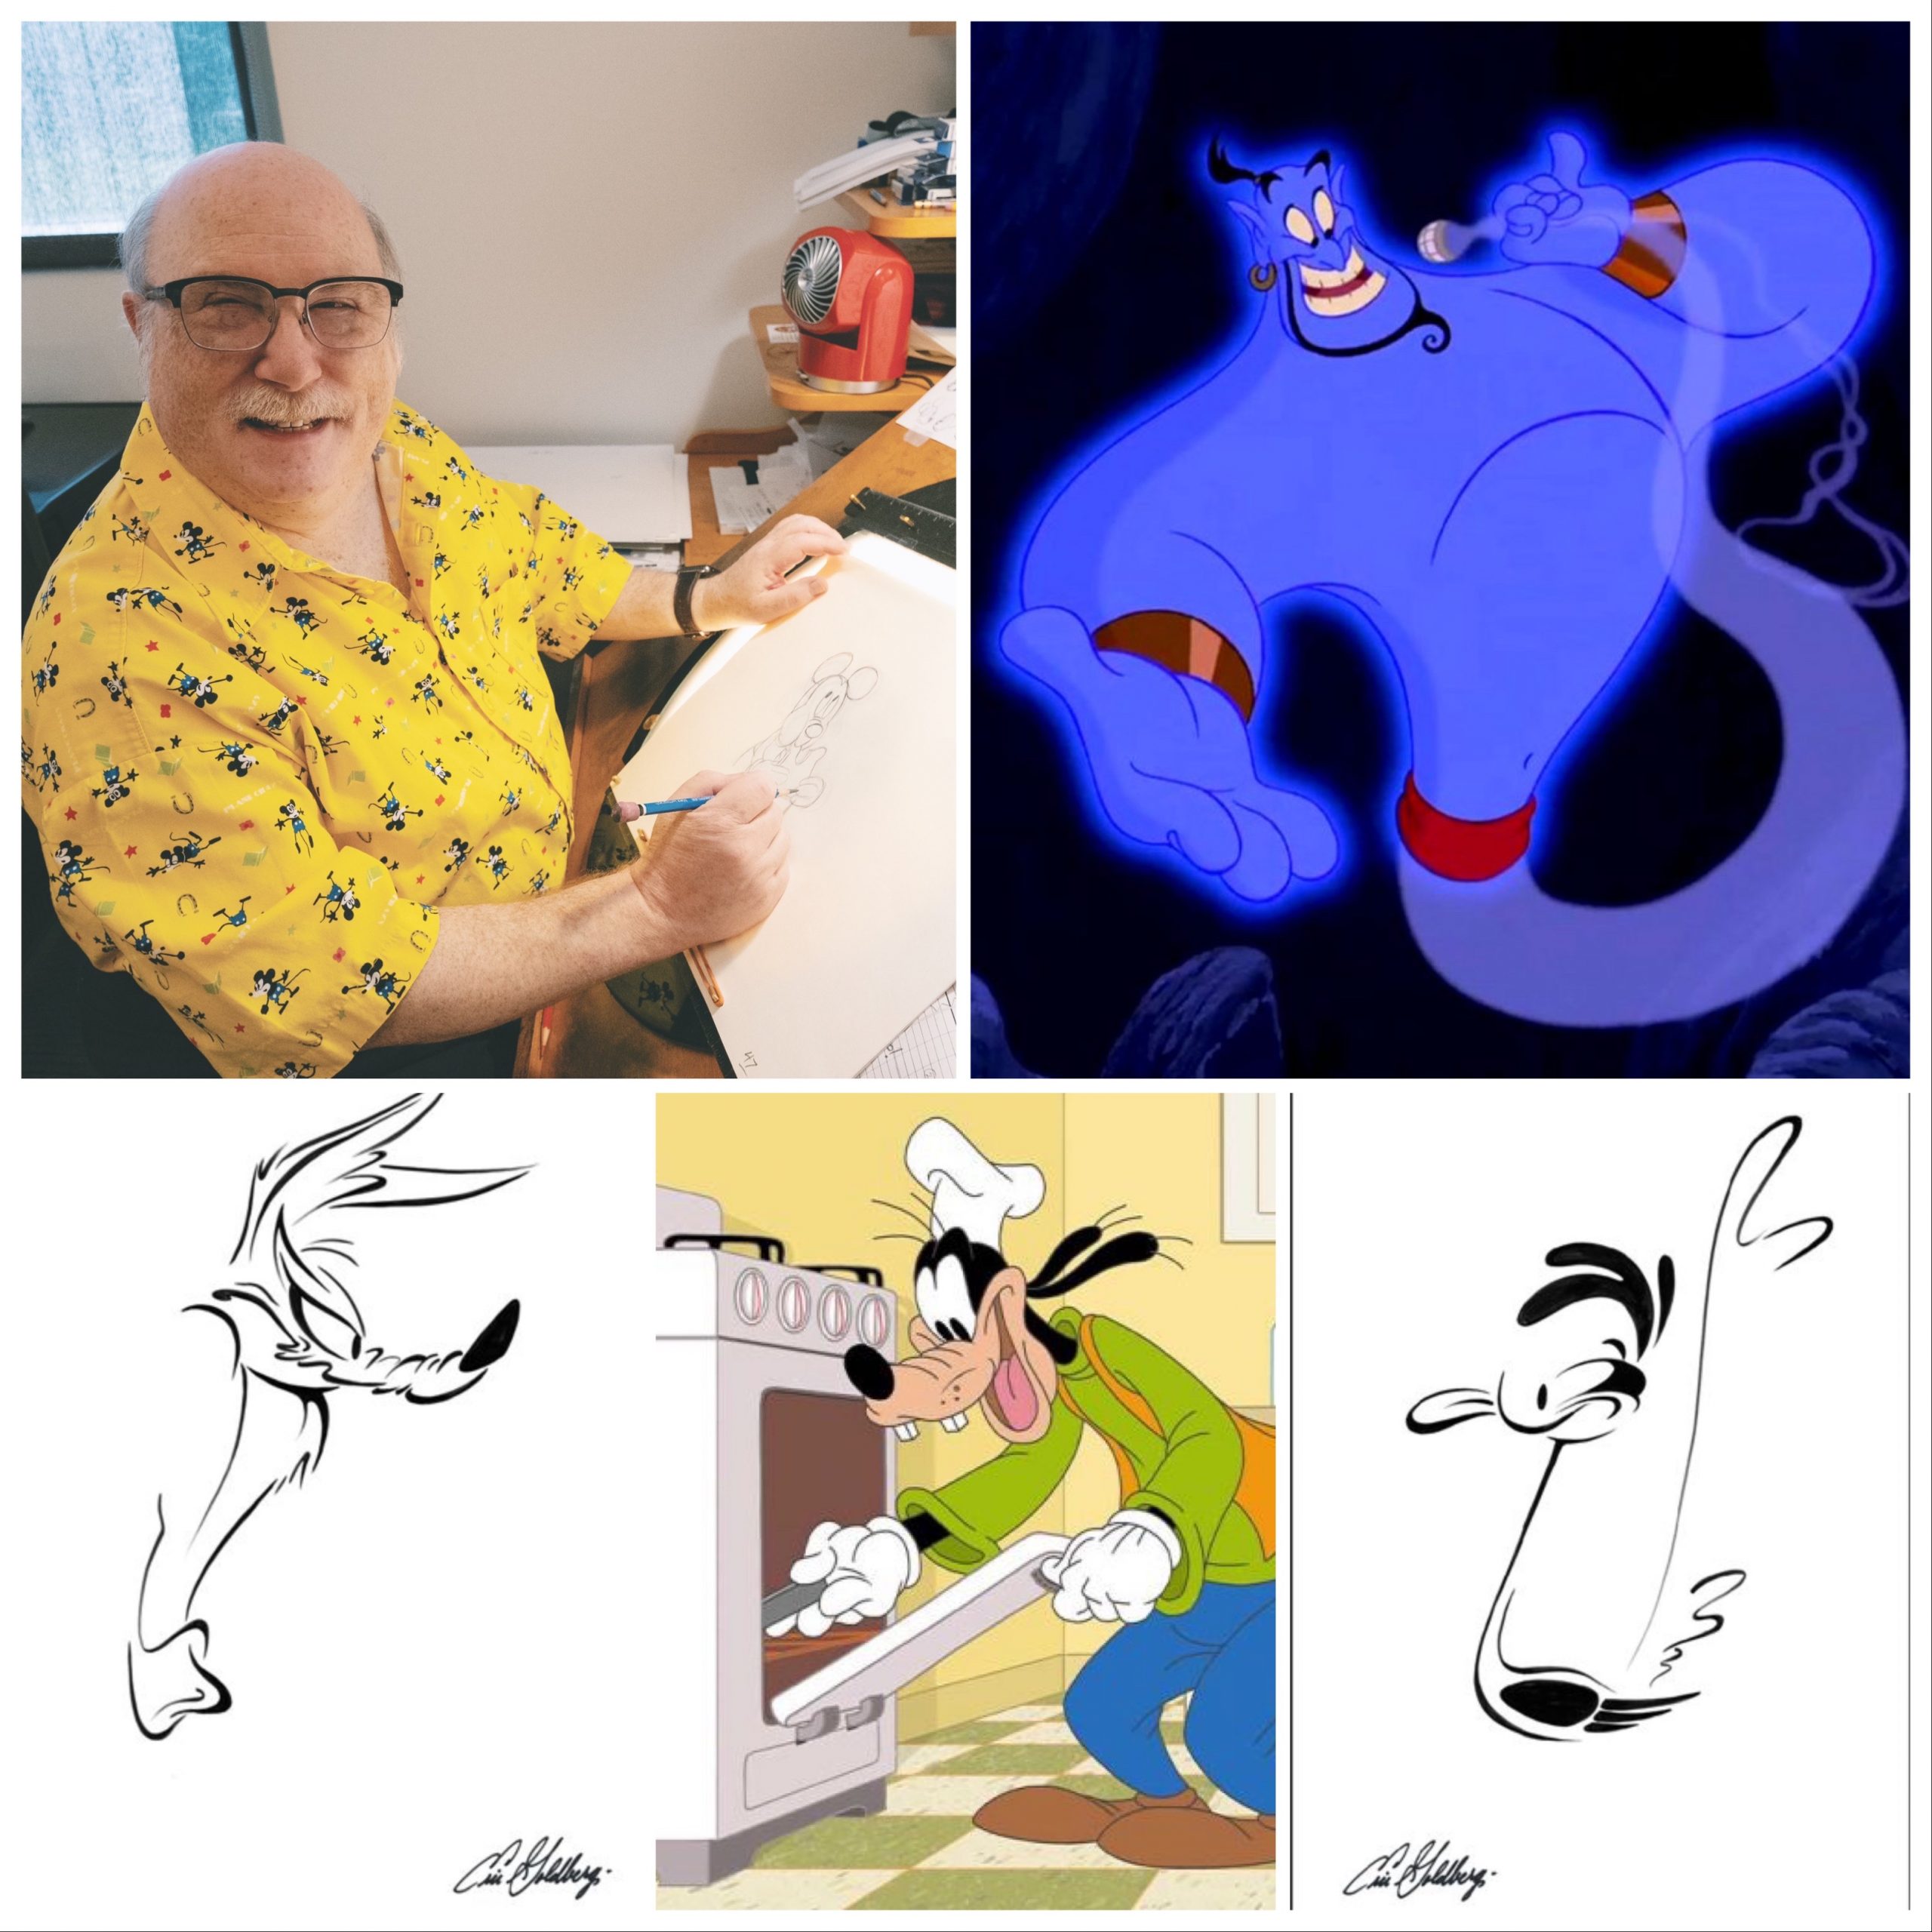 Disney cartoon combination thread, Gallery posted by ggarfield.d